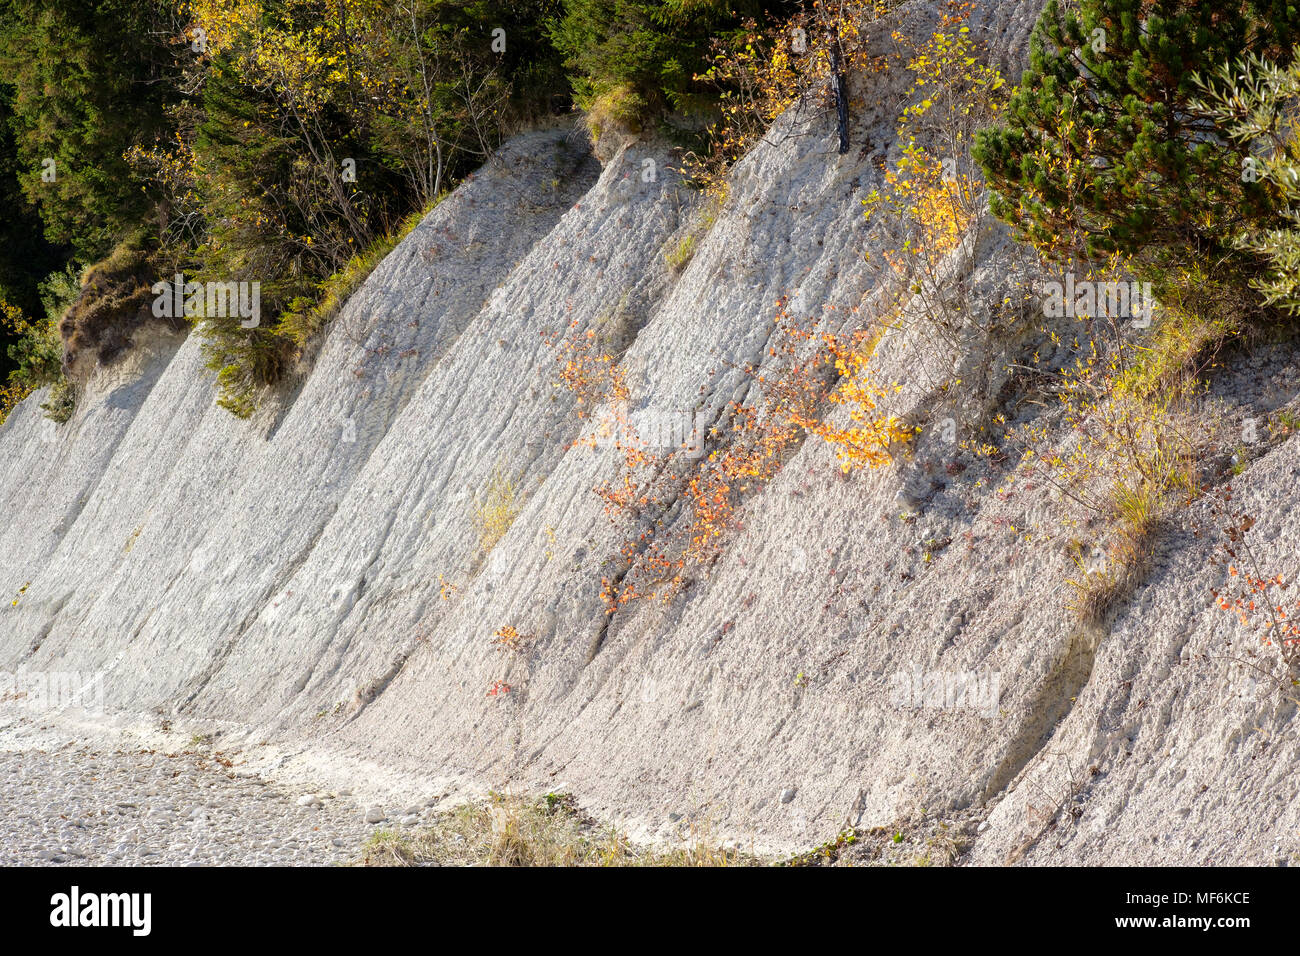 Nagelfluh or conglomerate on the banks of the Isar, Isartal in Wallgau, Werdenfels, Upper Bavaria, Bavaria, Germany Stock Photo